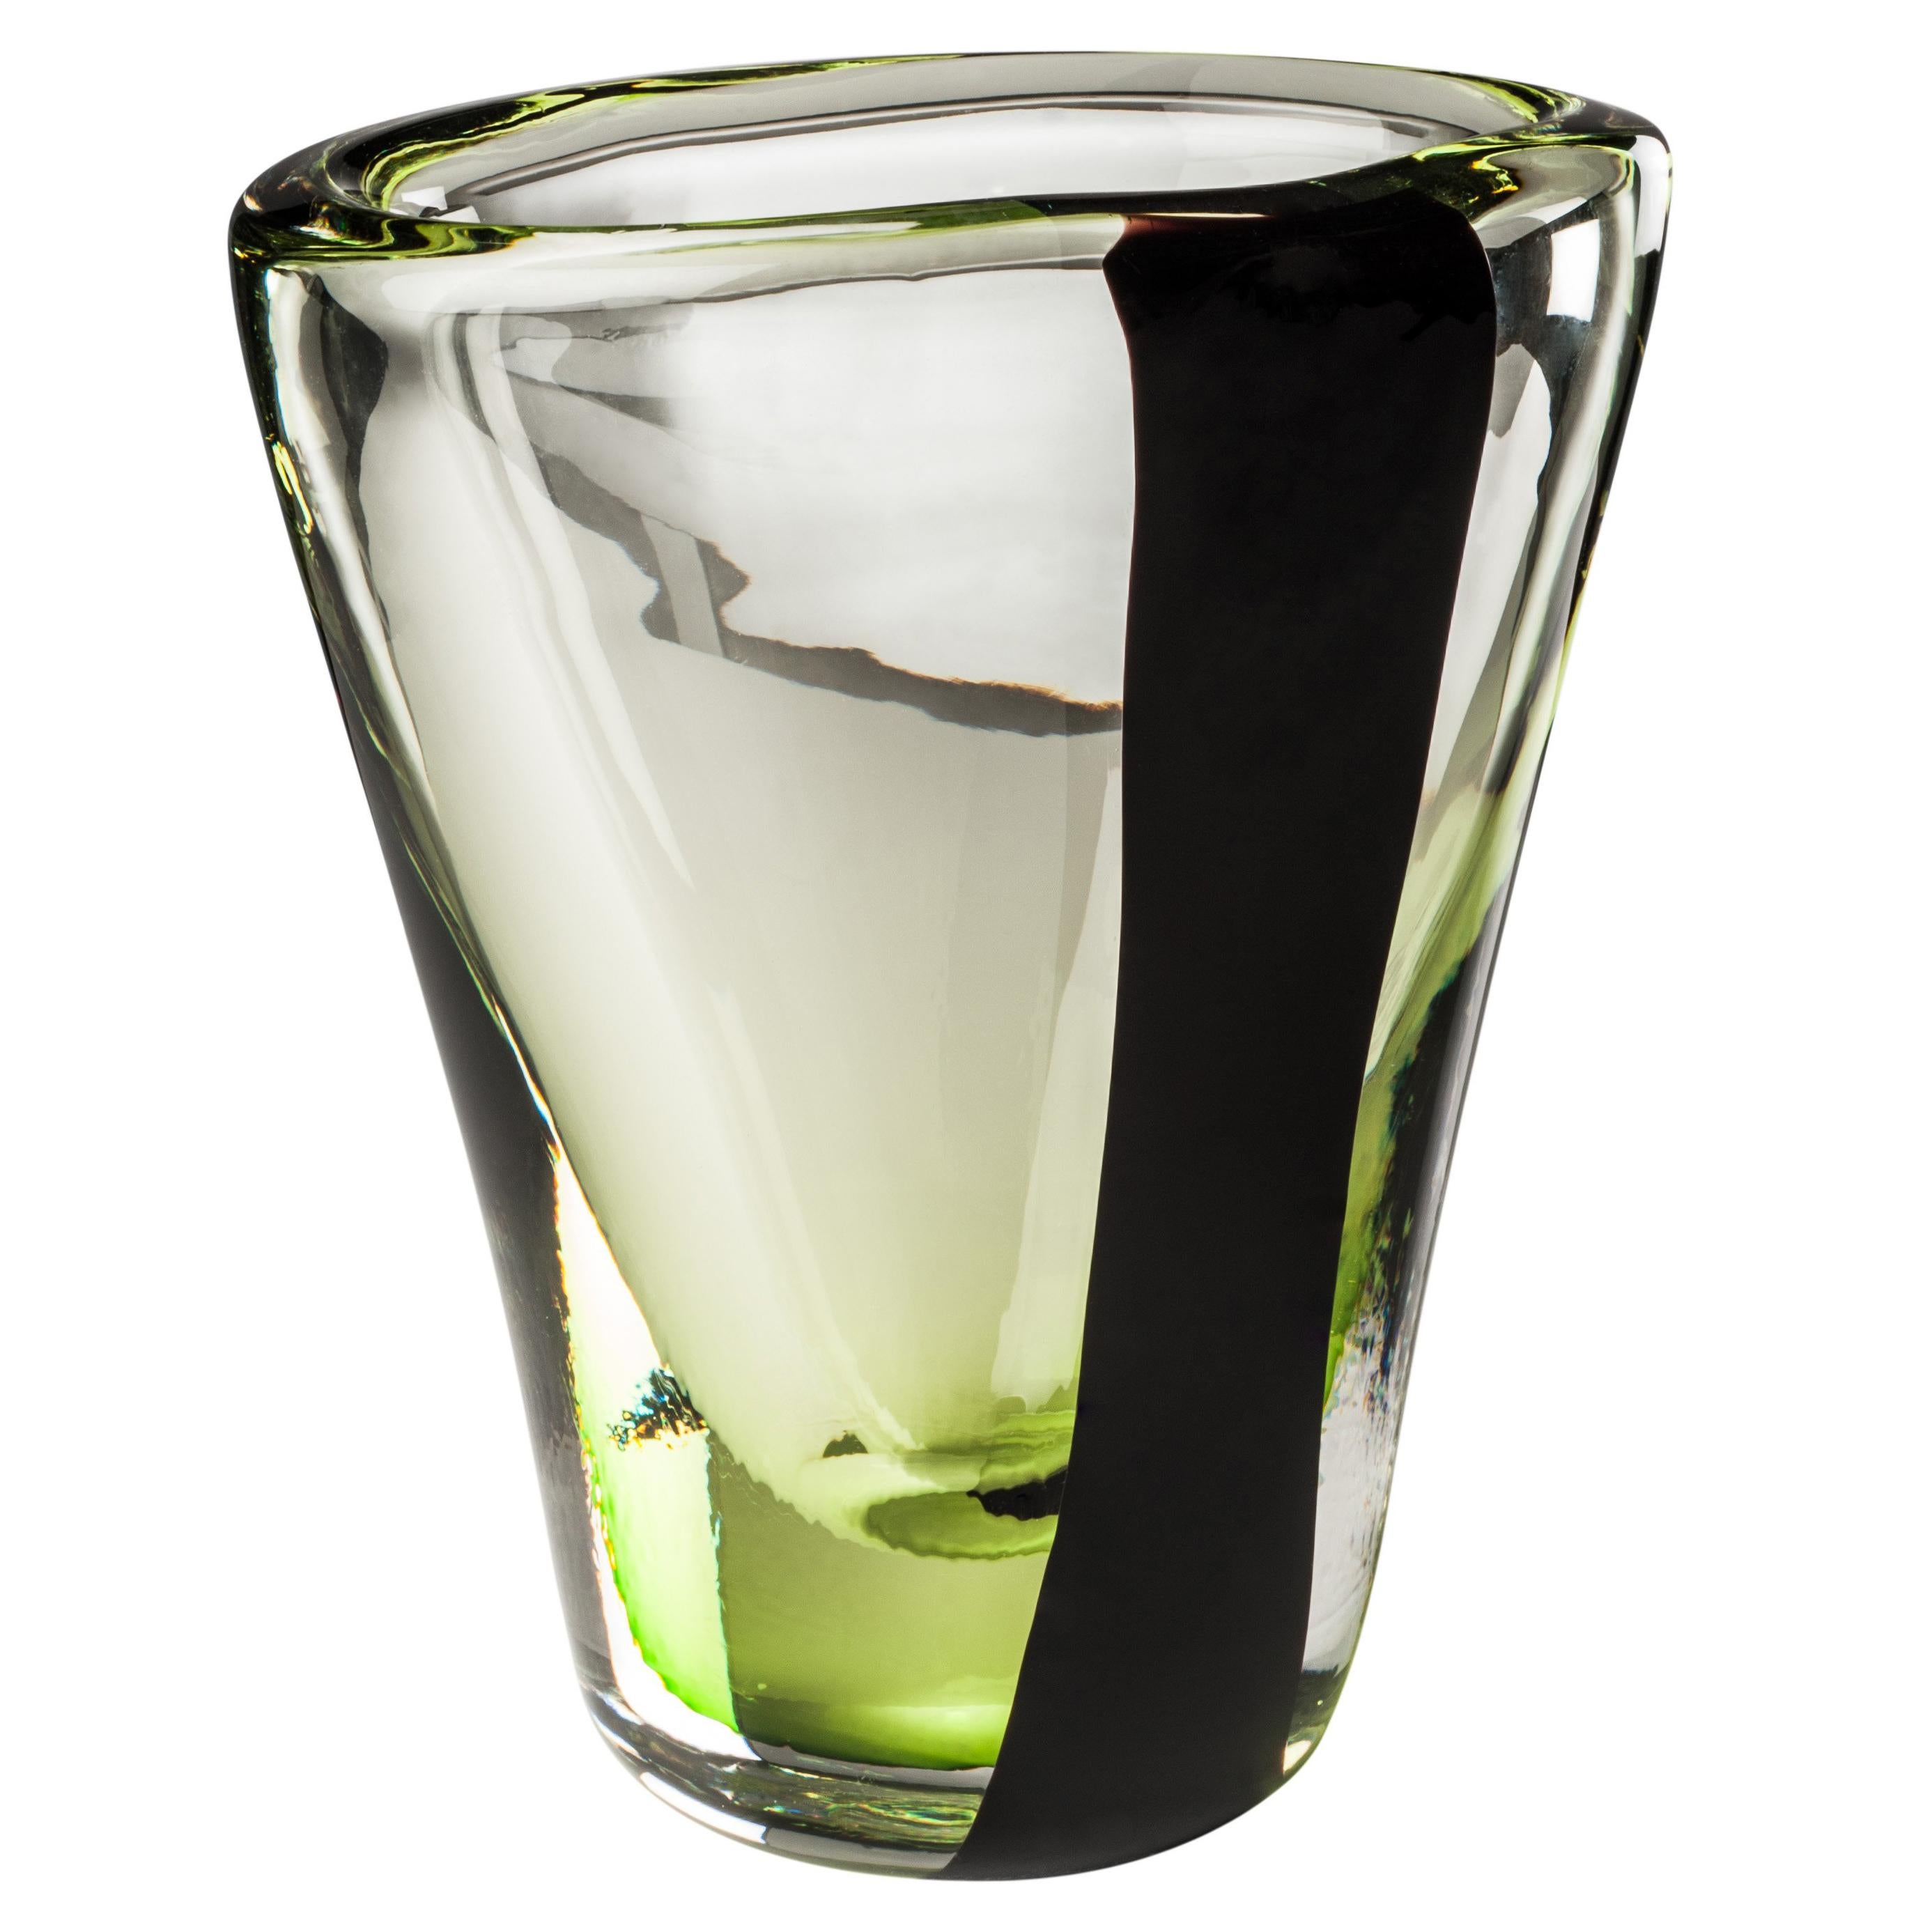 Venini Medium Black Belt Oval Glass Vase in Crystal and Green by Peter Marino